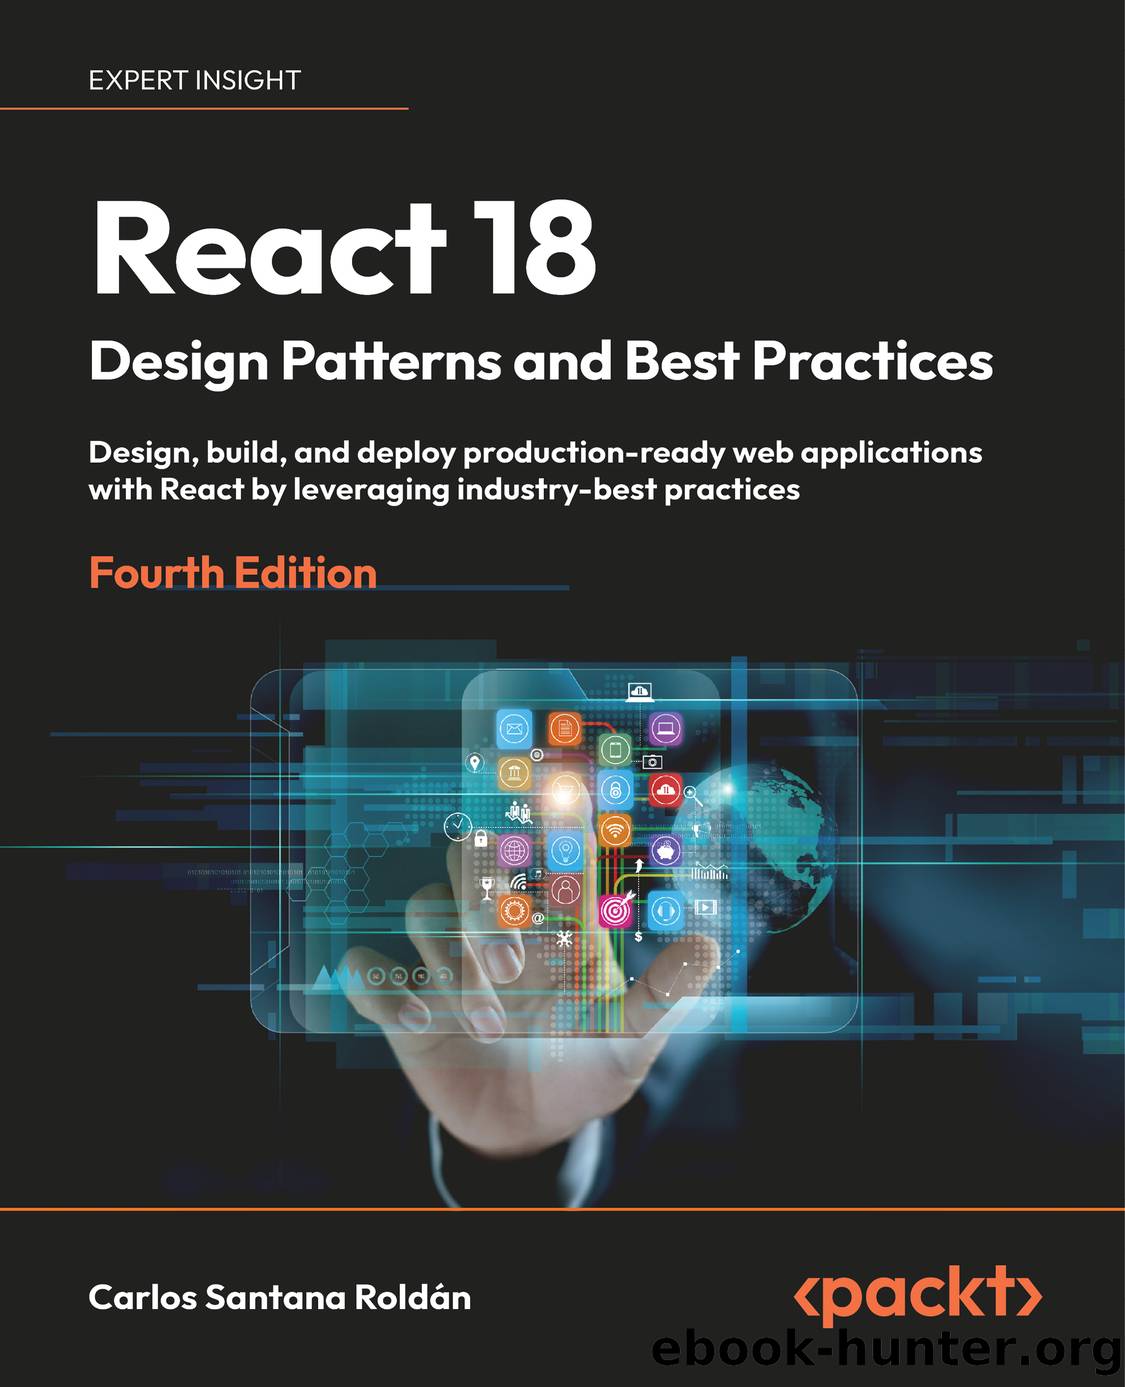 React 18 Design Patterns and Best Practices - Fourth Edition by Carlos Santana Roldán